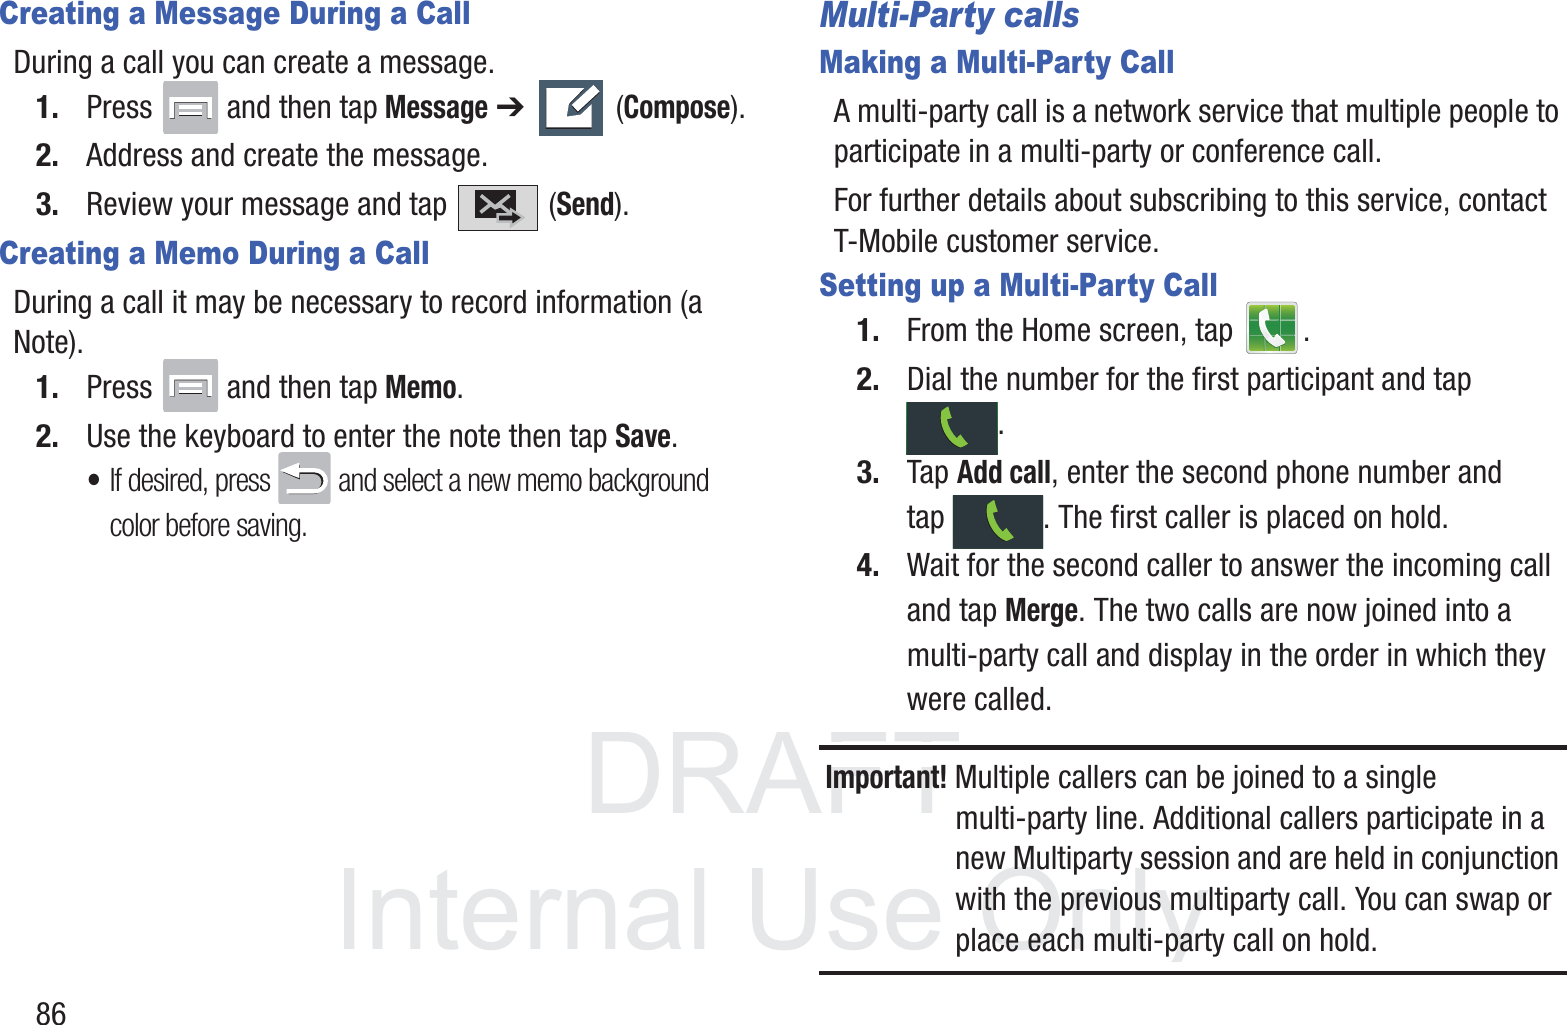 DRAFT InternalUse Only86Creating a Message During a CallDuring a call you can create a message.1. Press   and then tap Message ➔   (Compose).2. Address and create the message.3. Review your message and tap   (Send).Creating a Memo During a CallDuring a call it may be necessary to record information (a Note).1. Press   and then tap Memo.2. Use the keyboard to enter the note then tap Save.•If desired, press   and select a new memo background color before saving.Multi-Party callsMaking a Multi-Party CallA multi-party call is a network service that multiple people to participate in a multi-party or conference call.For further details about subscribing to this service, contact T-Mobile customer service.Setting up a Multi-Party Call1. From the Home screen, tap  .2. Dial the number for the first participant and tap .3. Tap Add call, enter the second phone number and tap  . The first caller is placed on hold.4. Wait for the second caller to answer the incoming call and tap Merge. The two calls are now joined into a multi-party call and display in the order in which they were called.Important! Multiple callers can be joined to a single multi-party line. Additional callers participate in a new Multiparty session and are held in conjunction with the previous multiparty call. You can swap or place each multi-party call on hold.